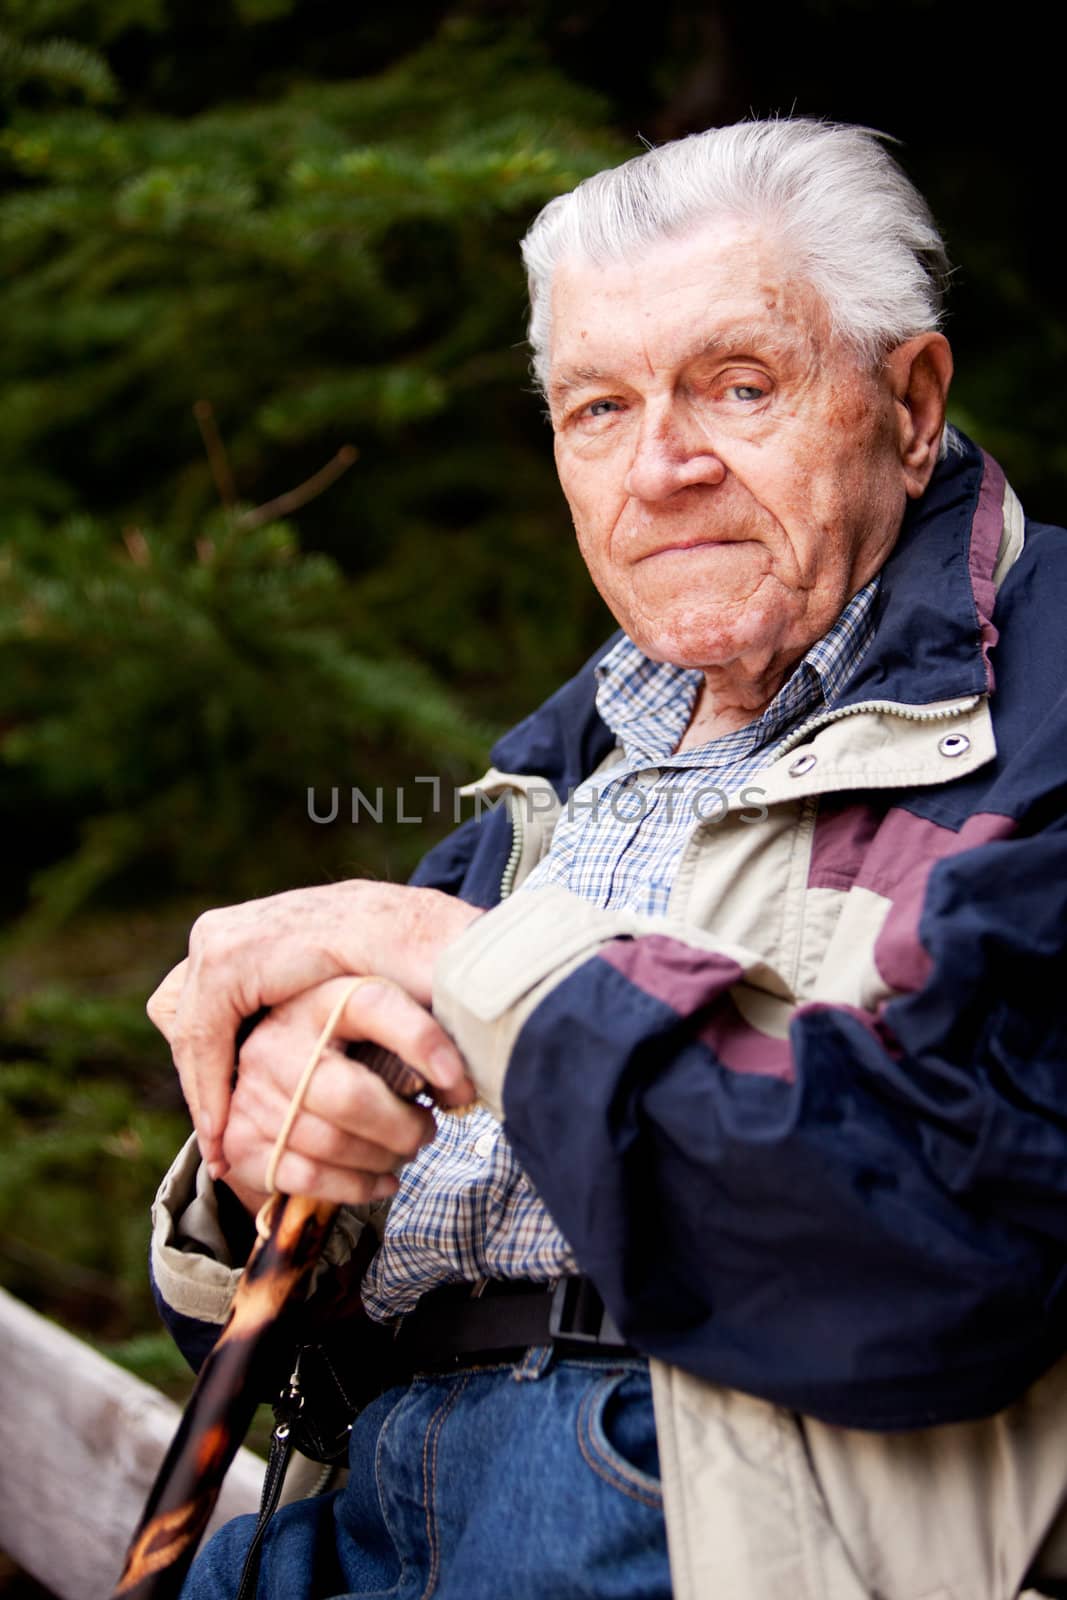 A portrait of an elderly man sitting looking at the camera